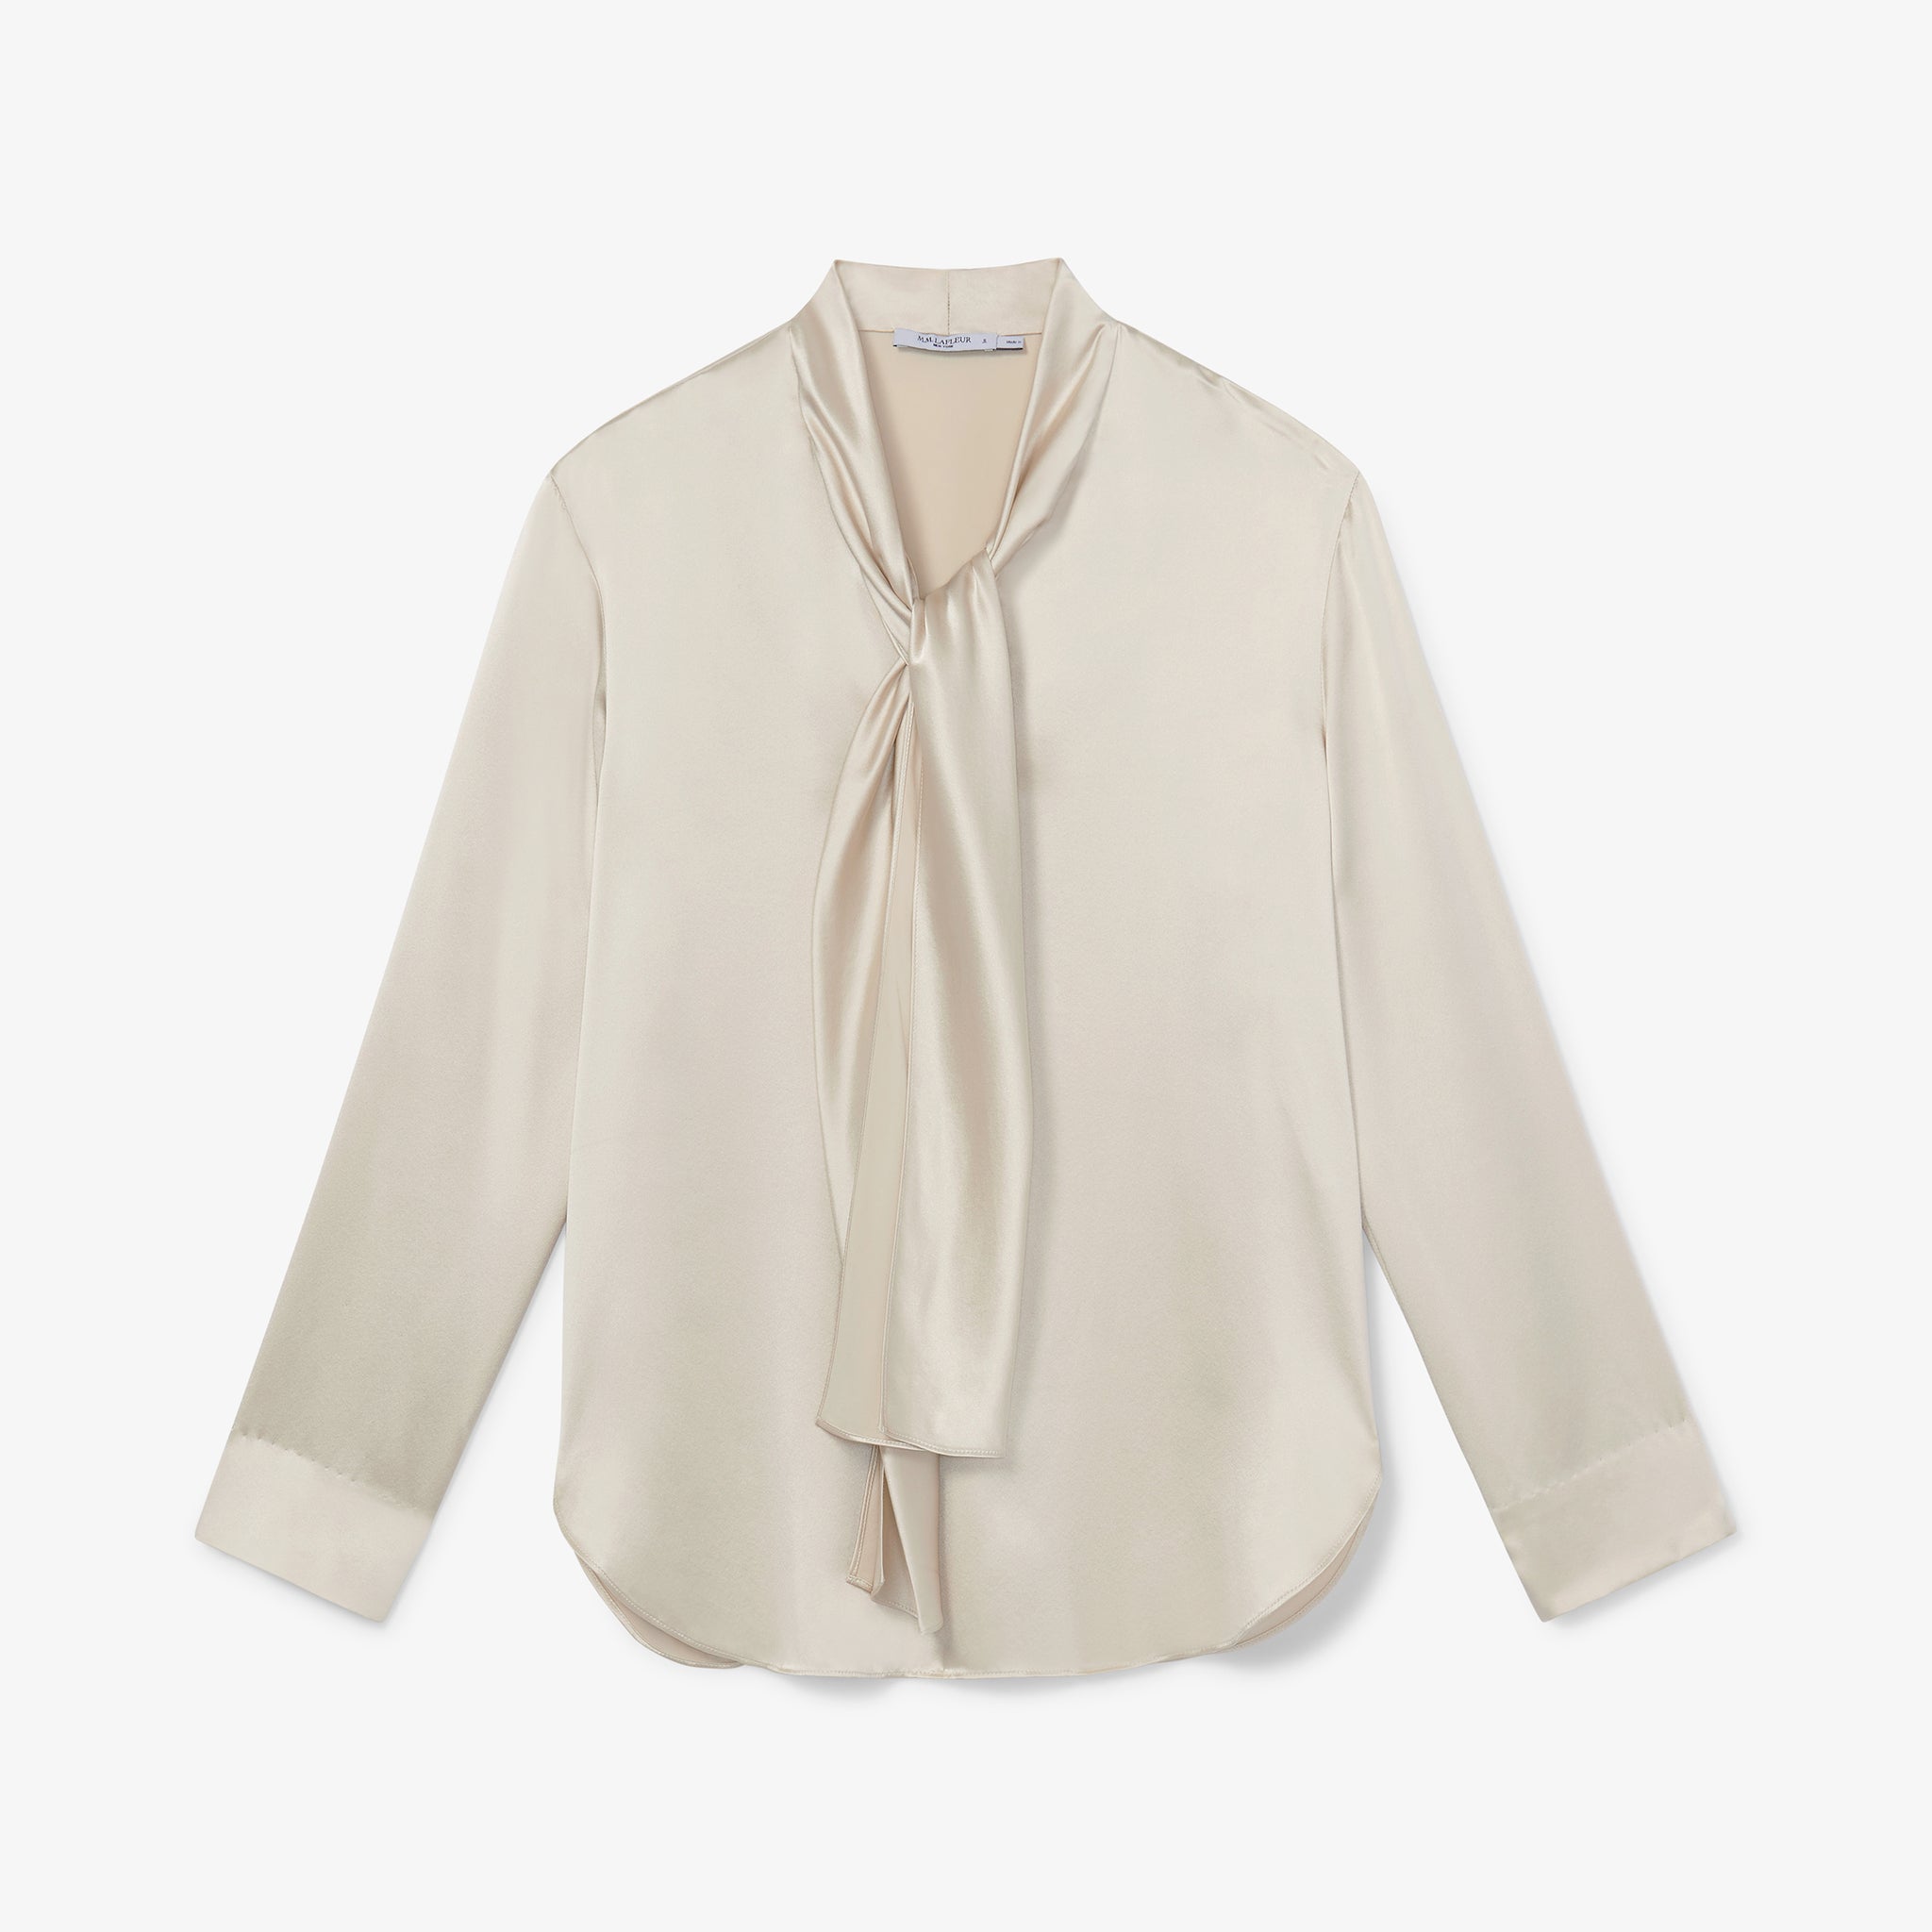 Packshot image of the Darcy Top - Washable Silk Charmeuse in Pearl